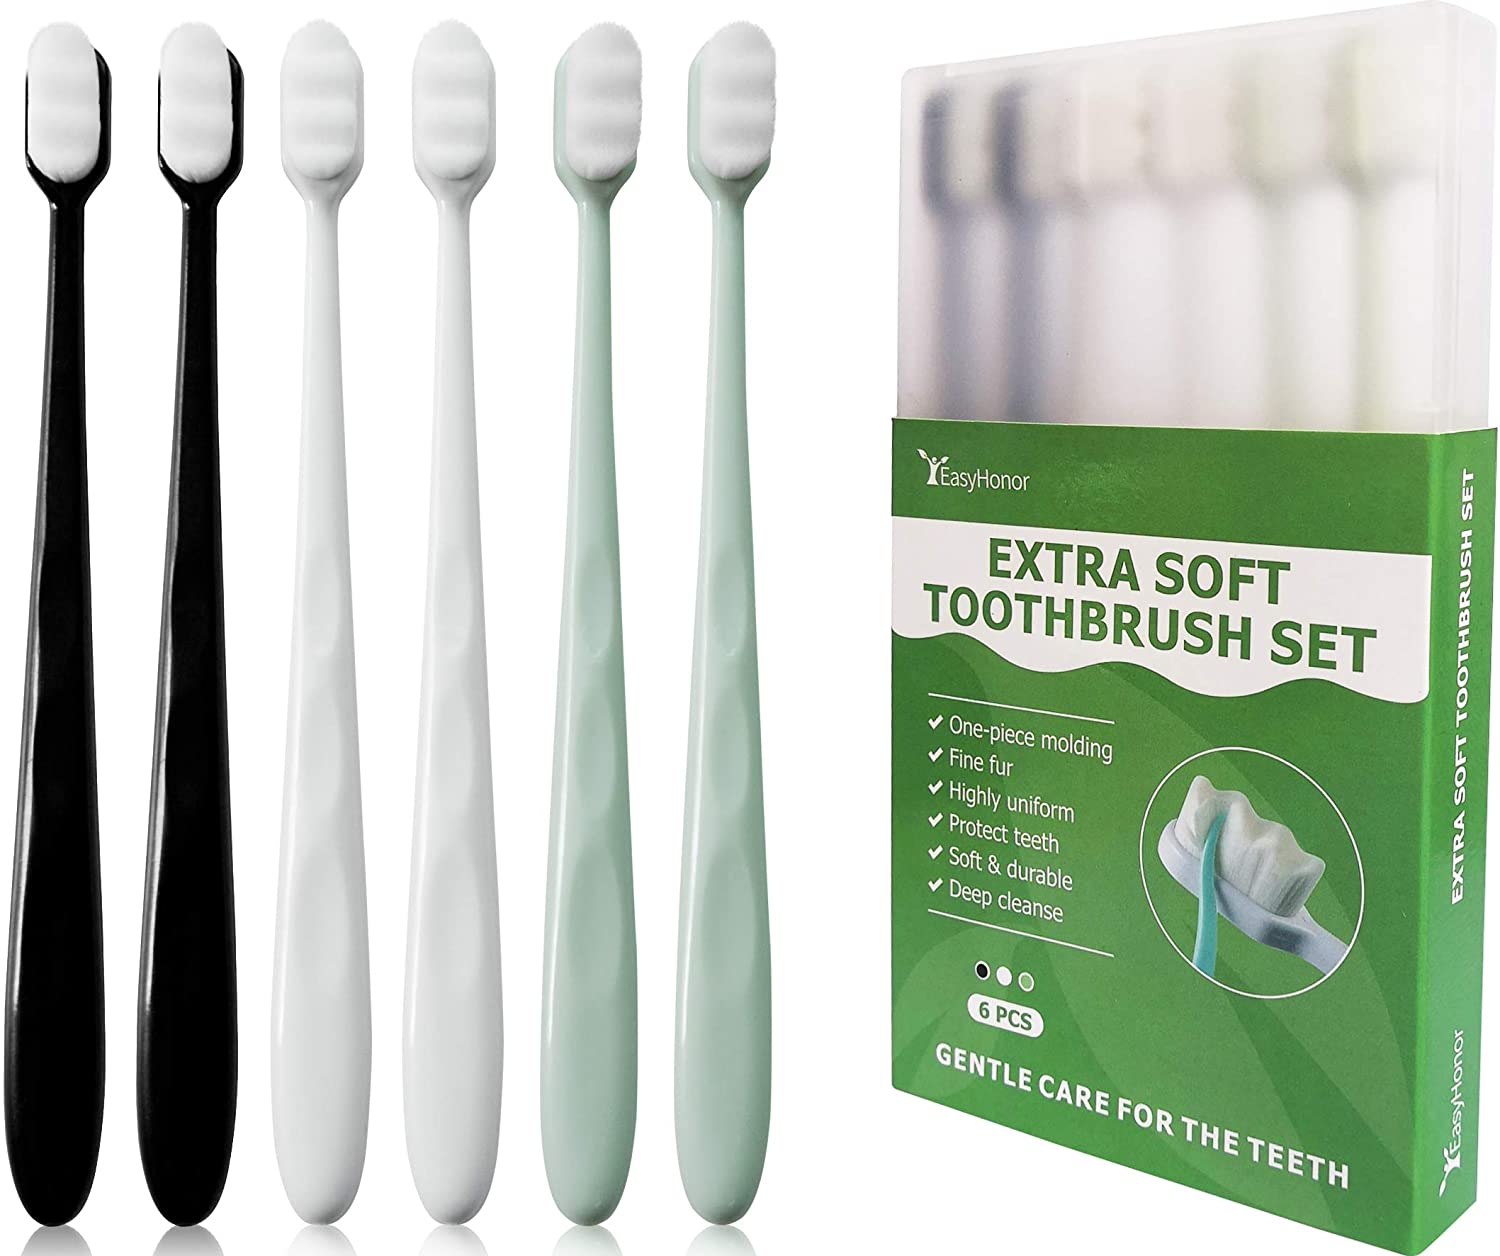 EasyHonor Extra Soft Toothbrush for Sensitive Gums, Micro-Nano Manual Toothbrush with 20000 Soft Floss Bristle for Pregnant Women, Elderly, Braces and Gum Recessions, Protect Fragile Gums (6 Pack)